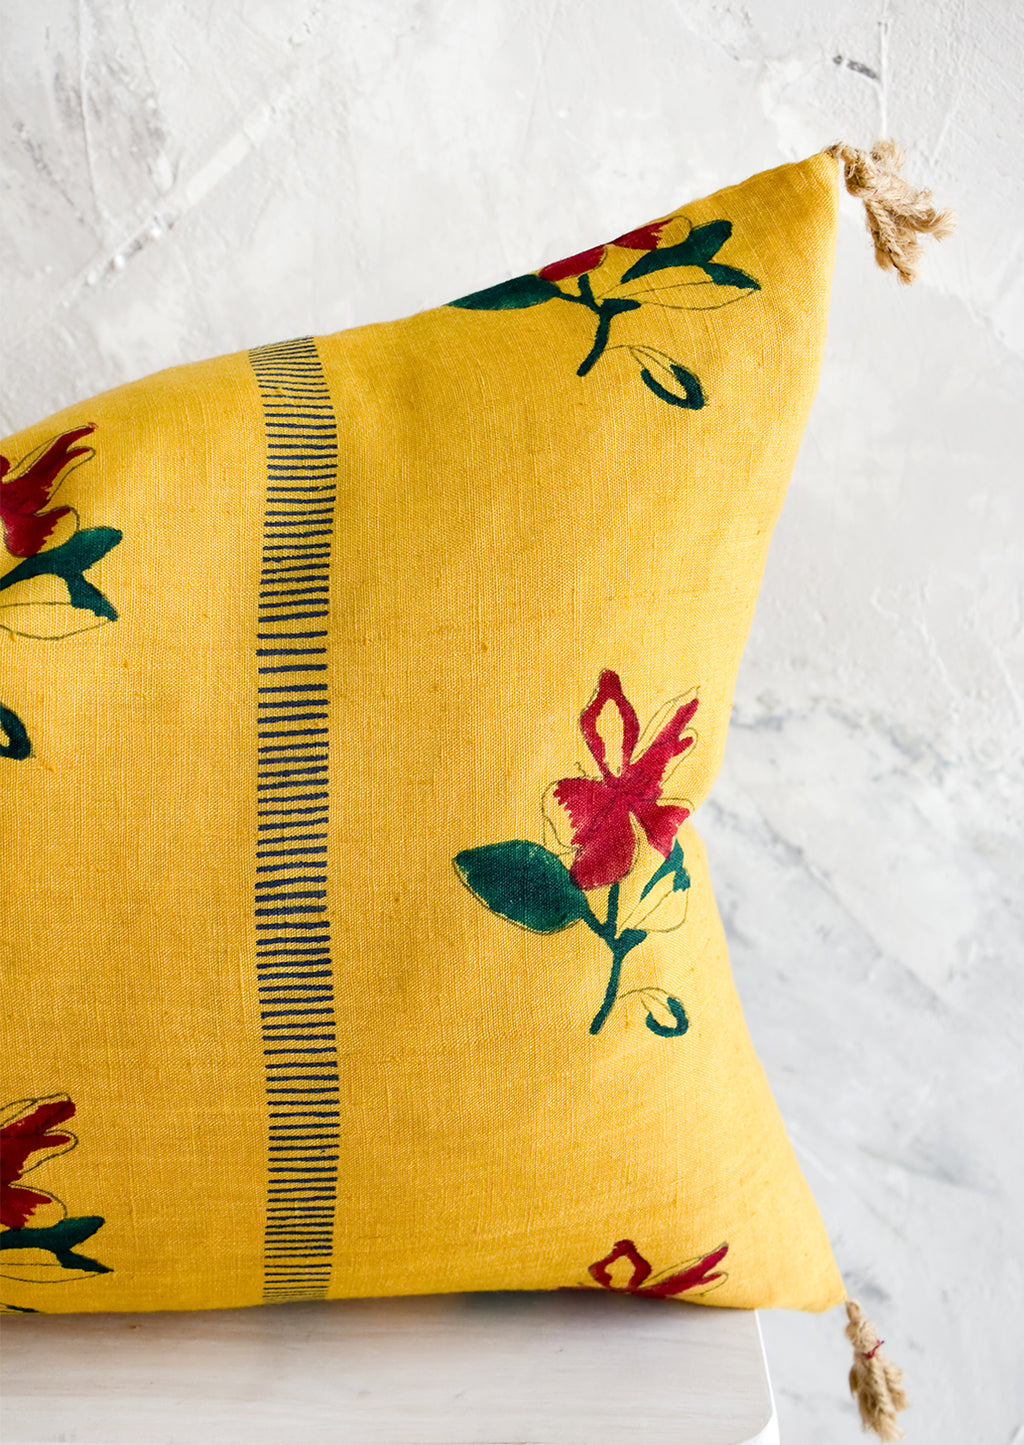 5: Linen pillow in mustard yellow with red and green block printed floral pattern